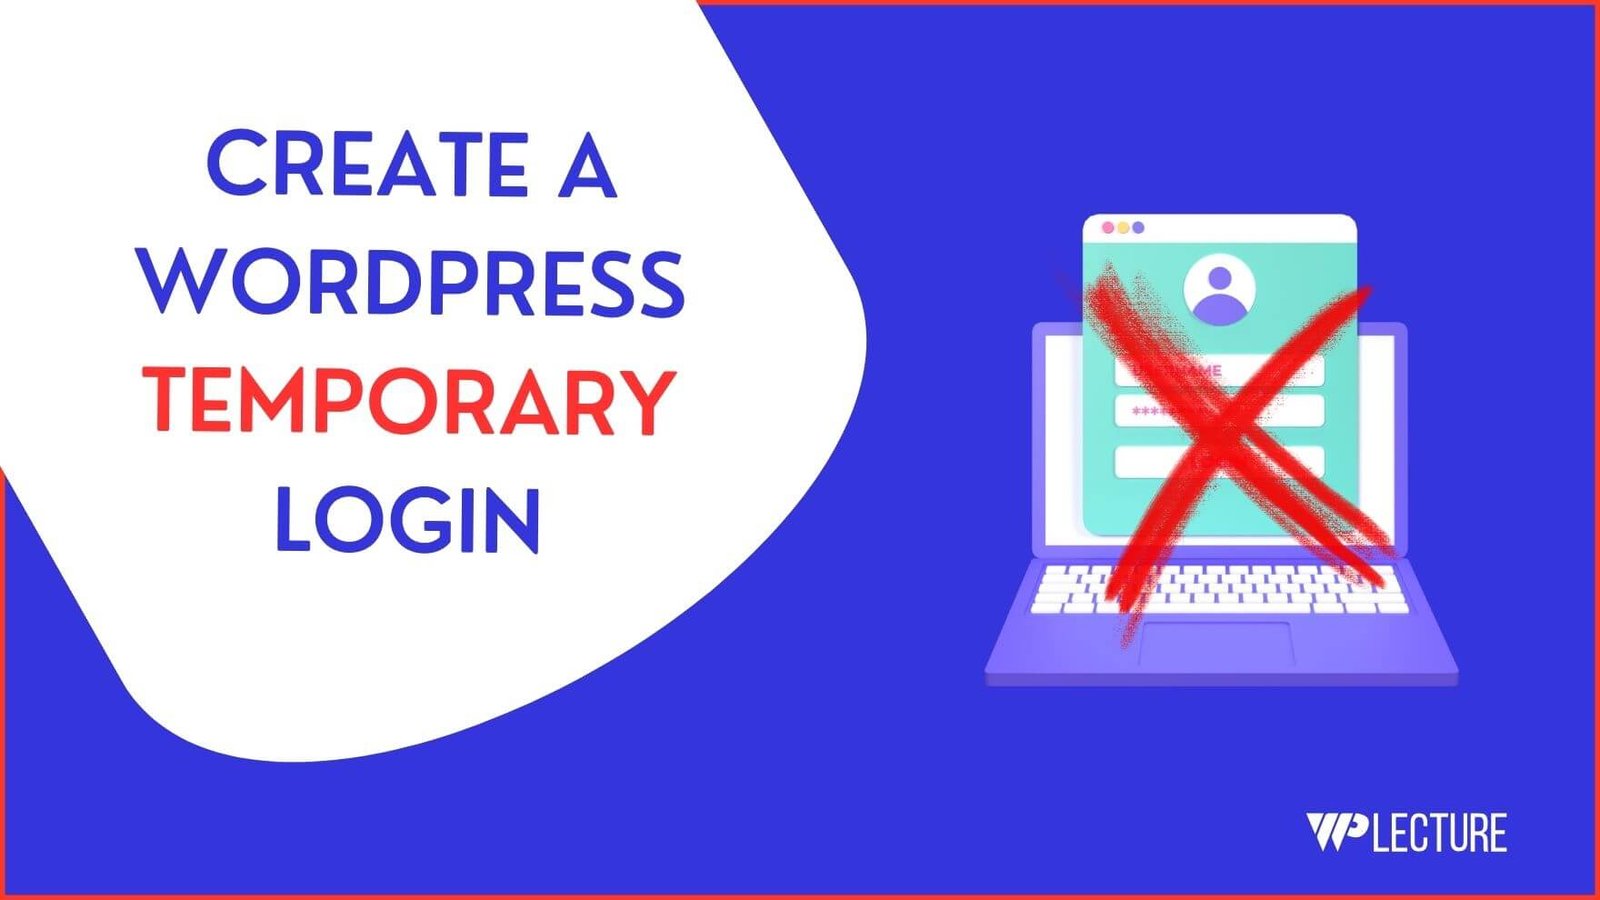 How To Create a WordPress Temporary Login Without Password